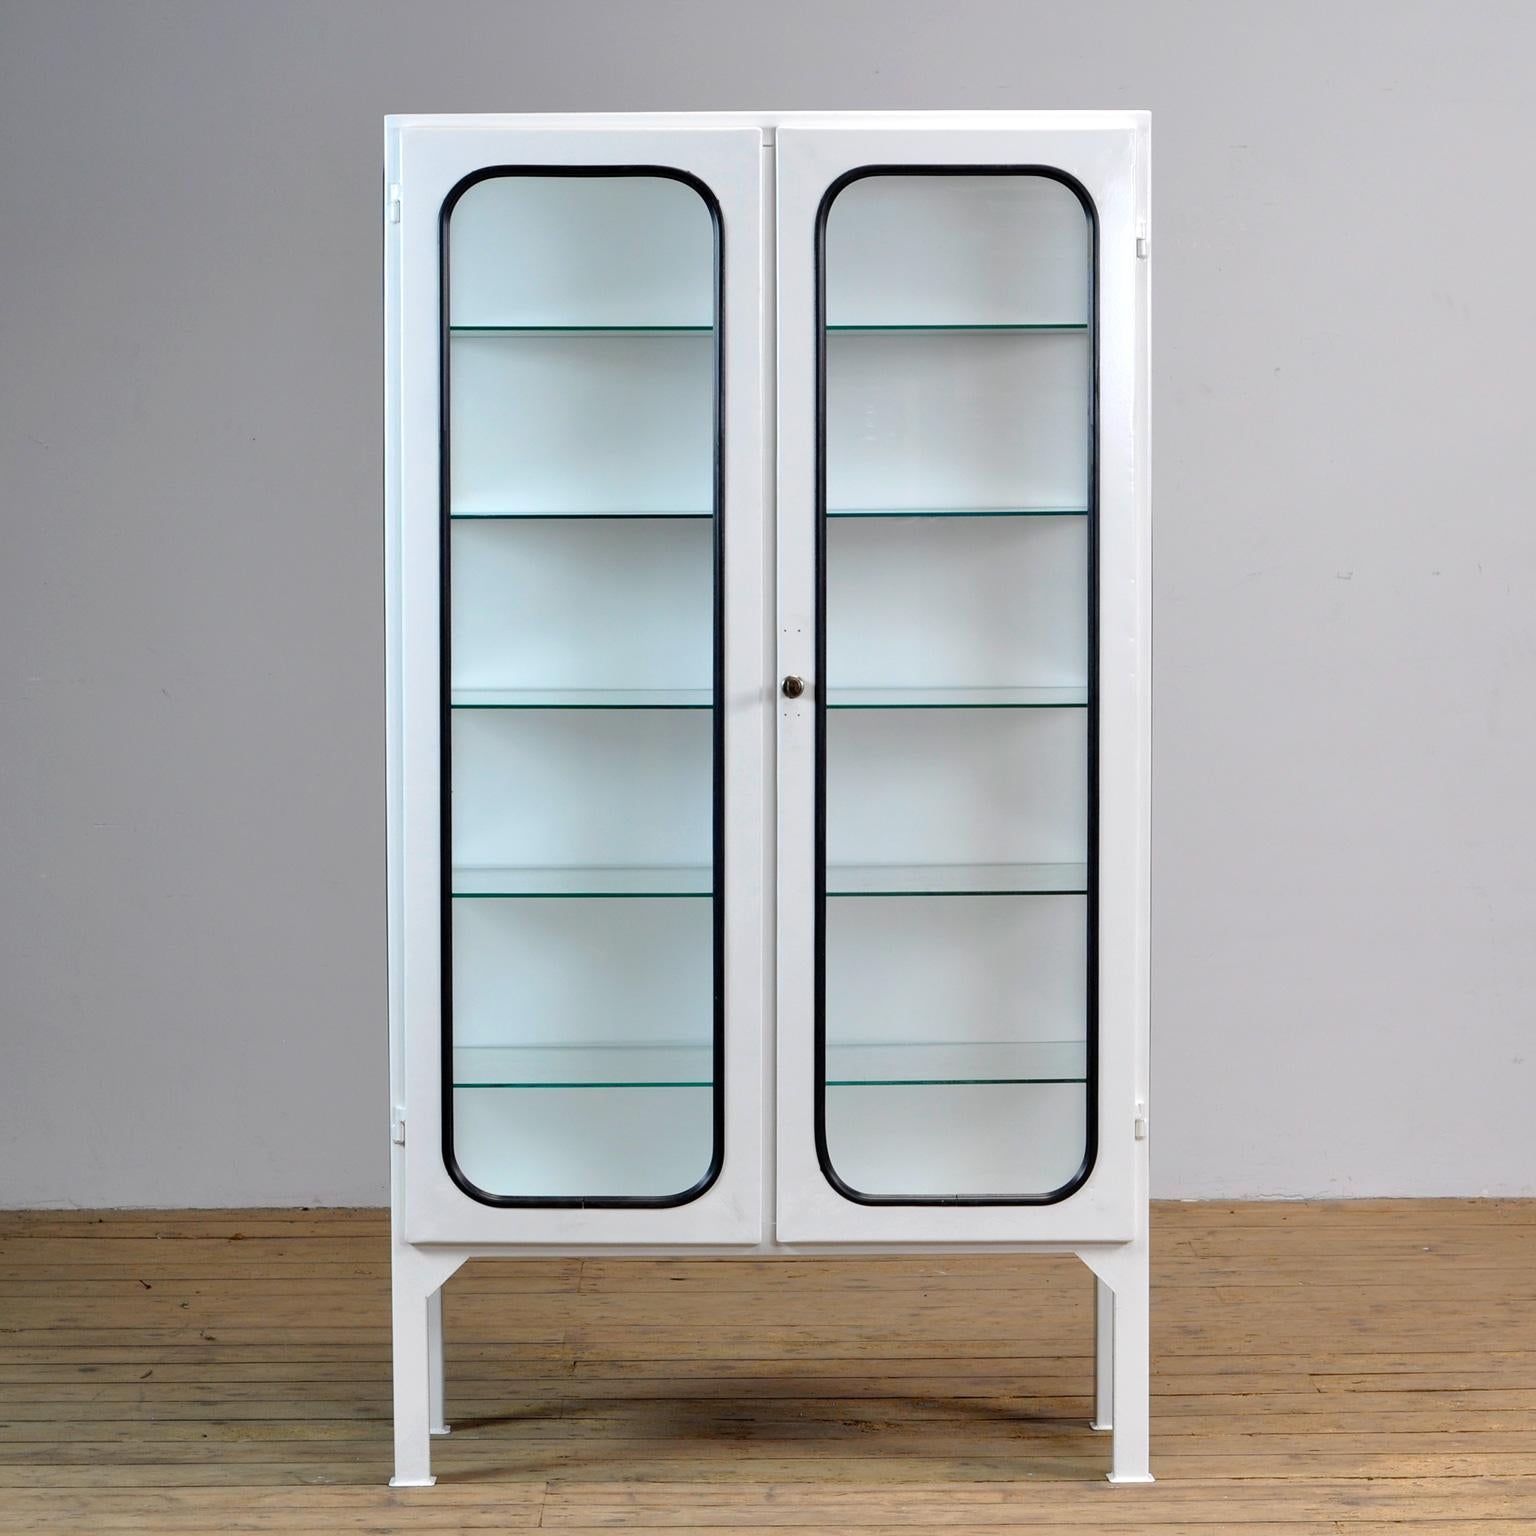 This medicine cabinet was designed in the 1970s and was produced circa 1975 in Hungary. It is made from iron and antique glass, and the glass is held by a black rubber strip. The cabinet features five adjustable glass shelves and a functioning